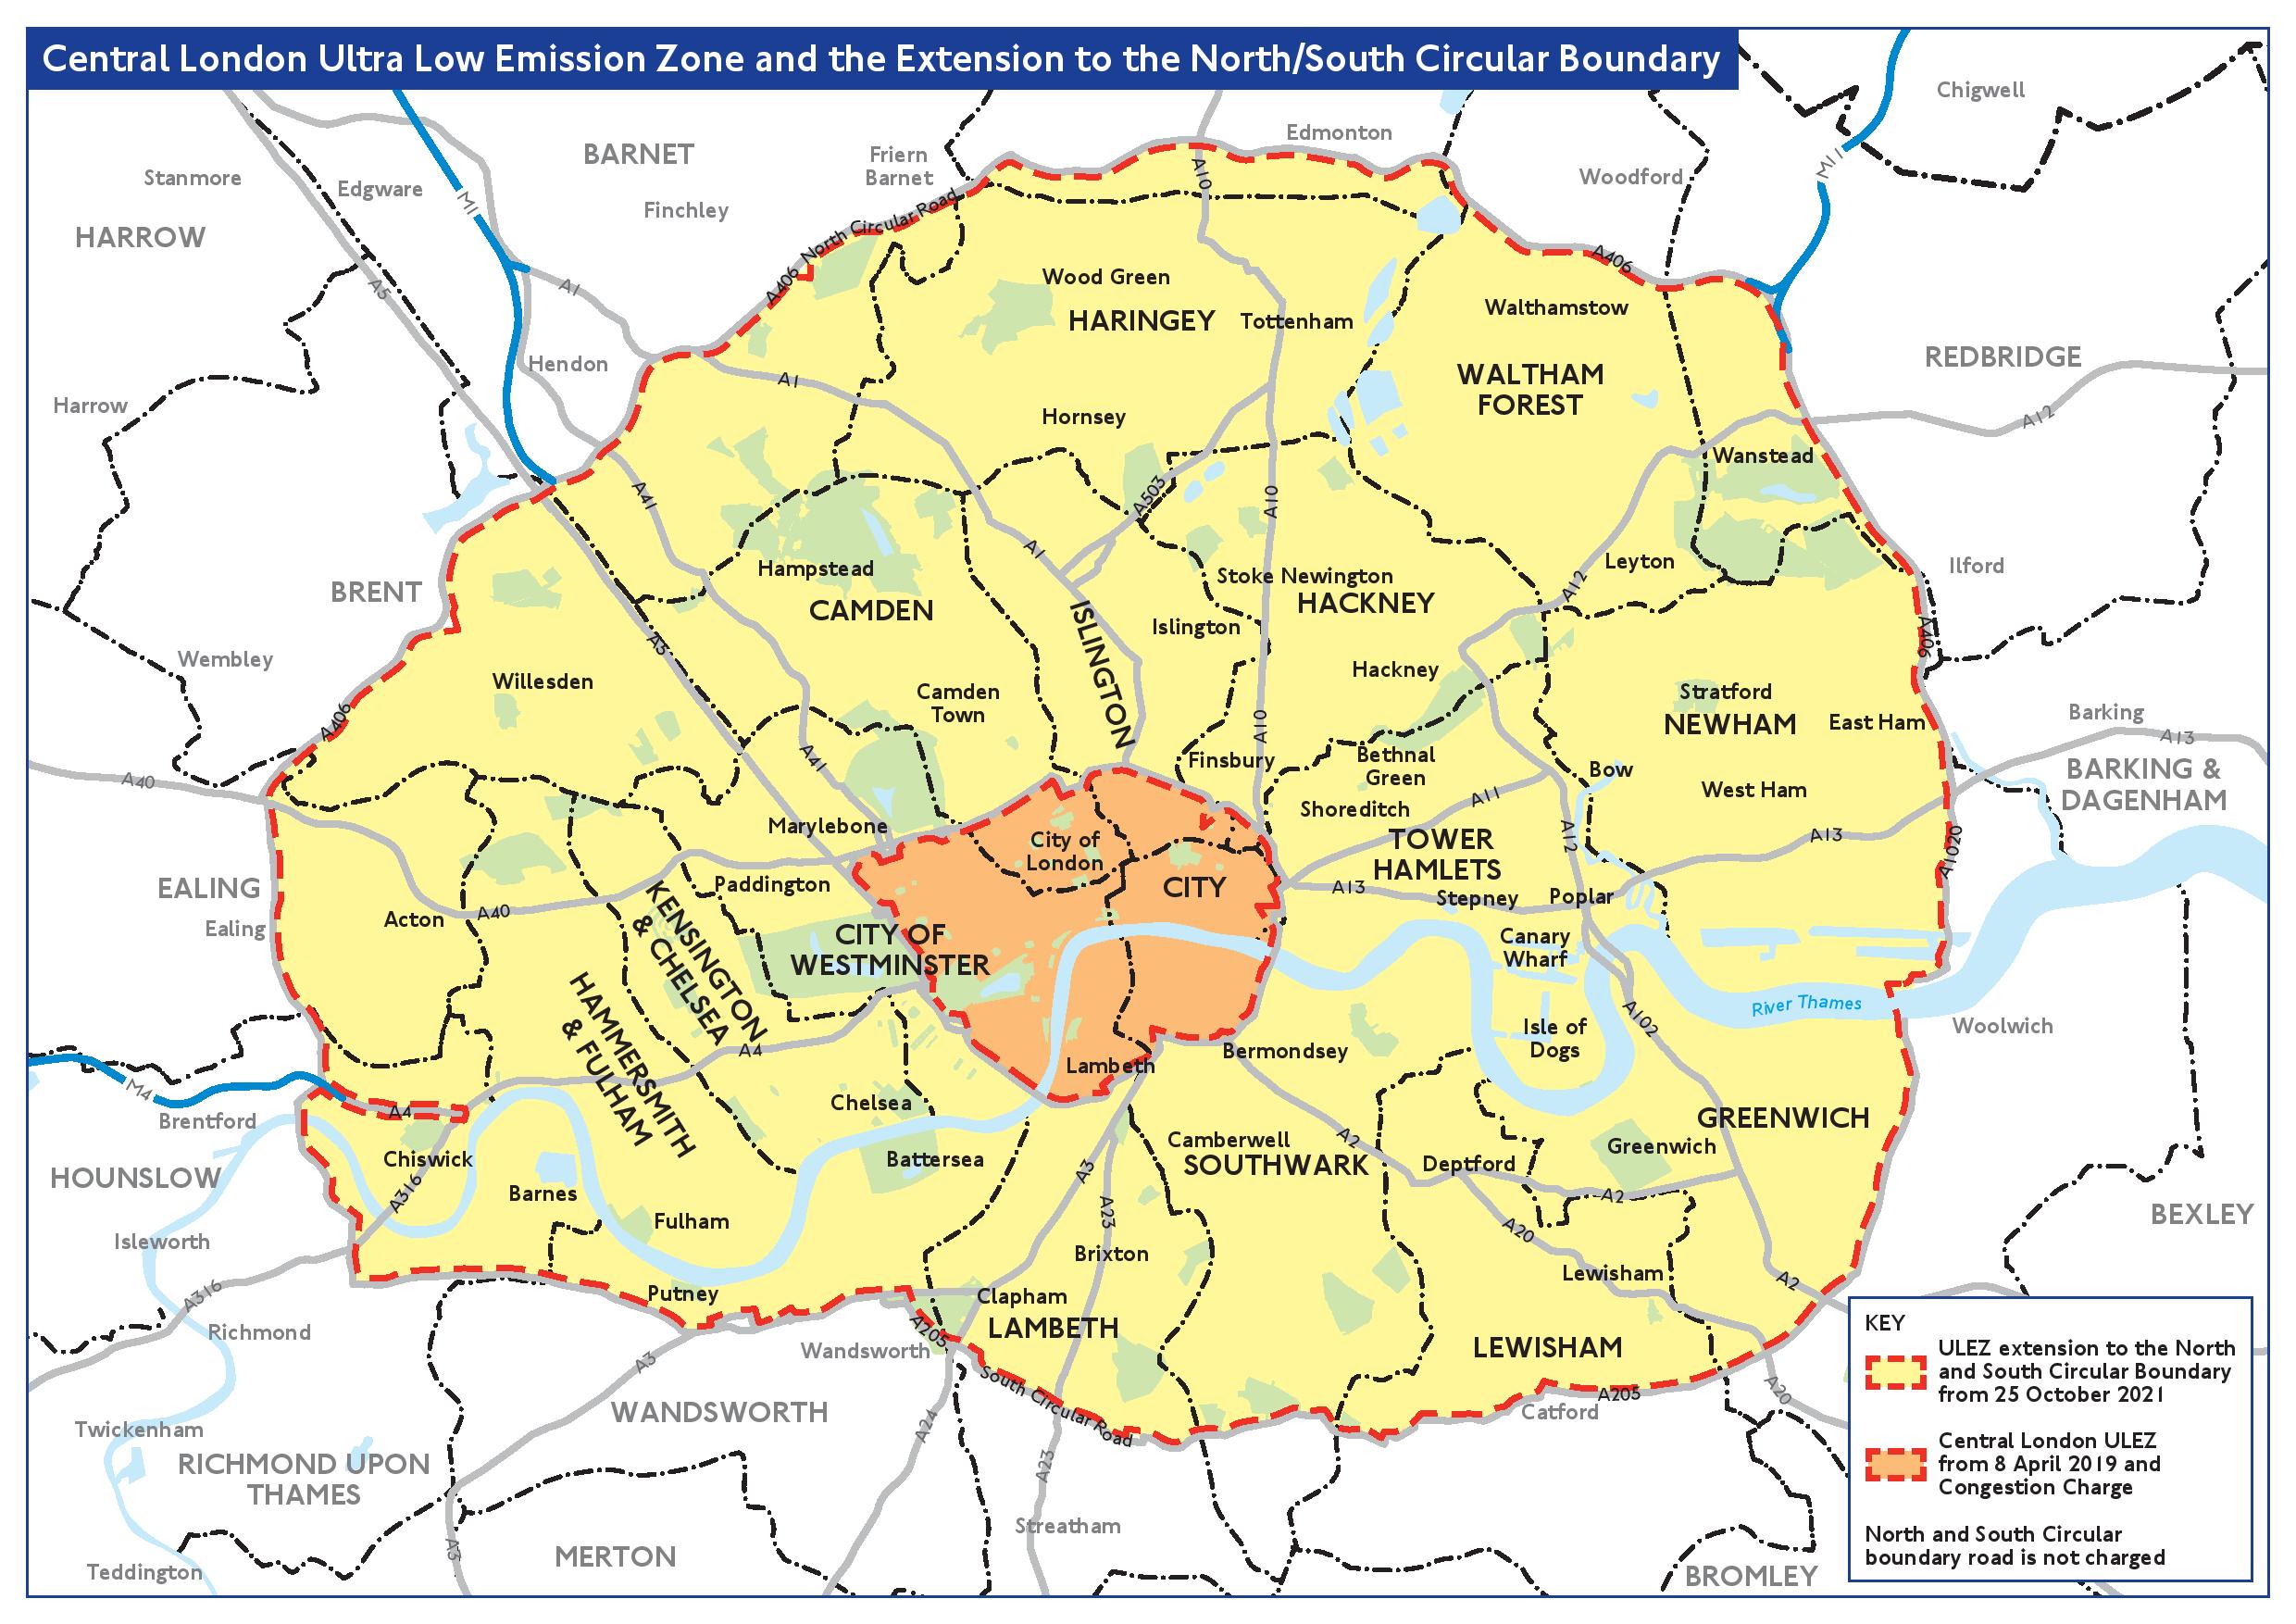 Why London's Ultra Low Emissions Zone is good policy | Centre for Cities